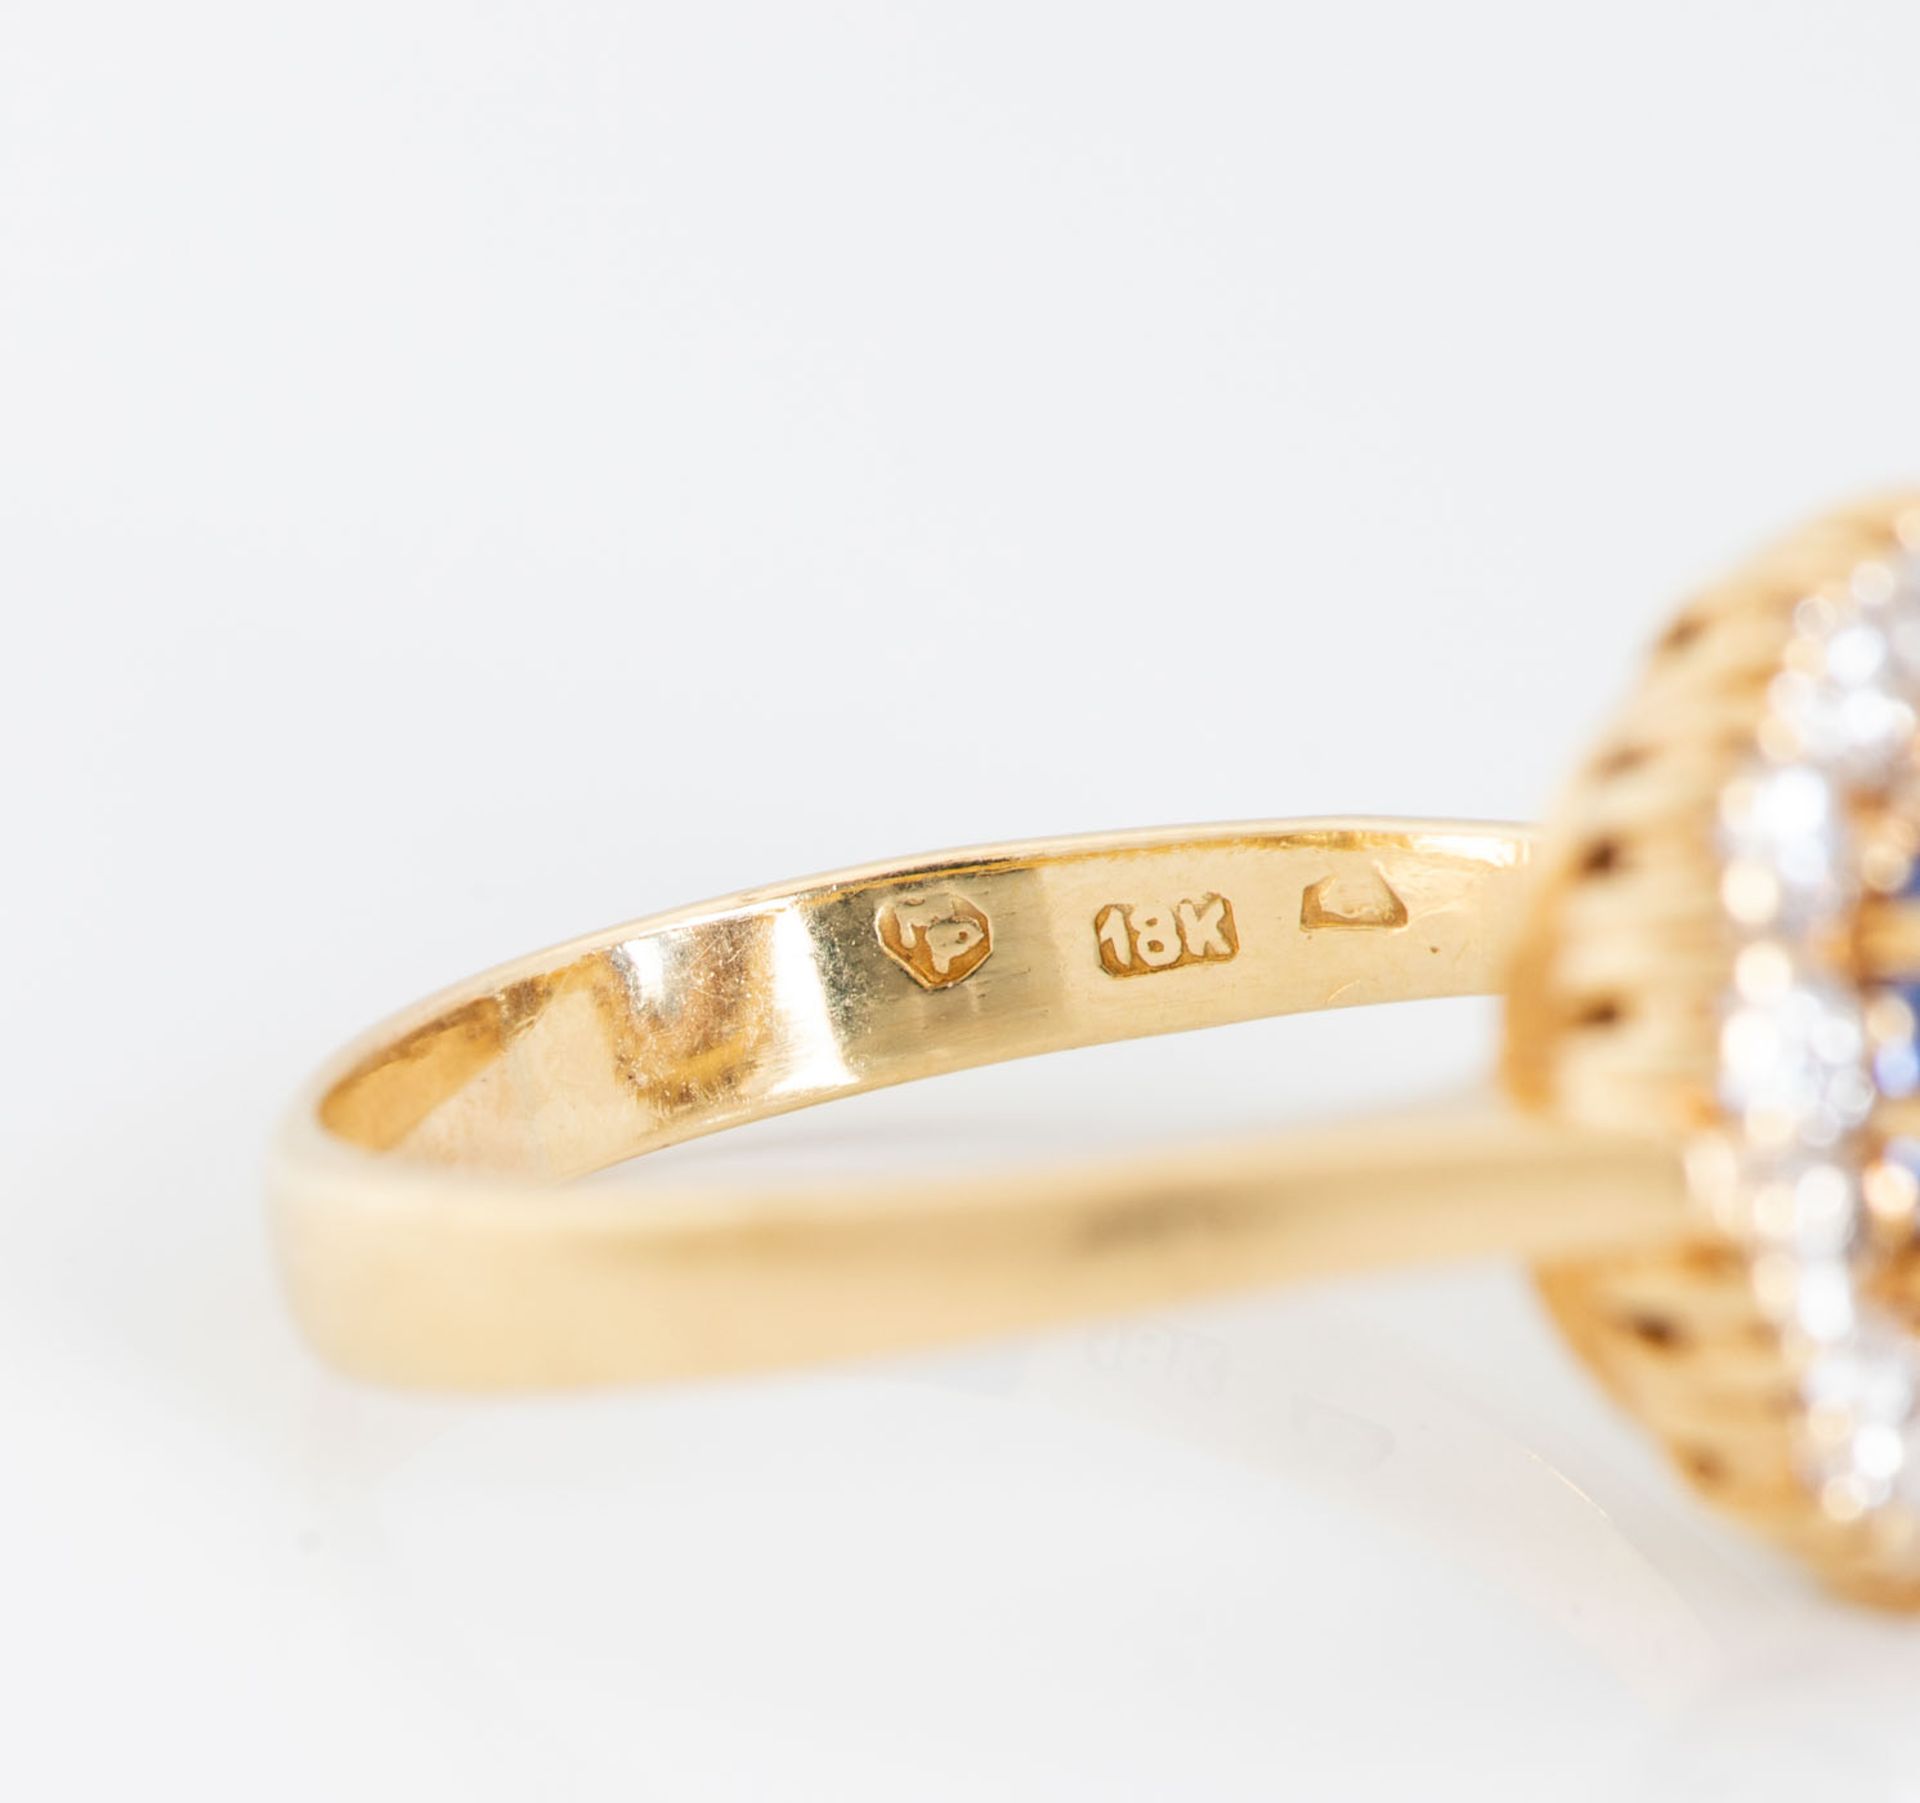 An 18K Gold Diamond and Sapphire Ring - Image 5 of 5